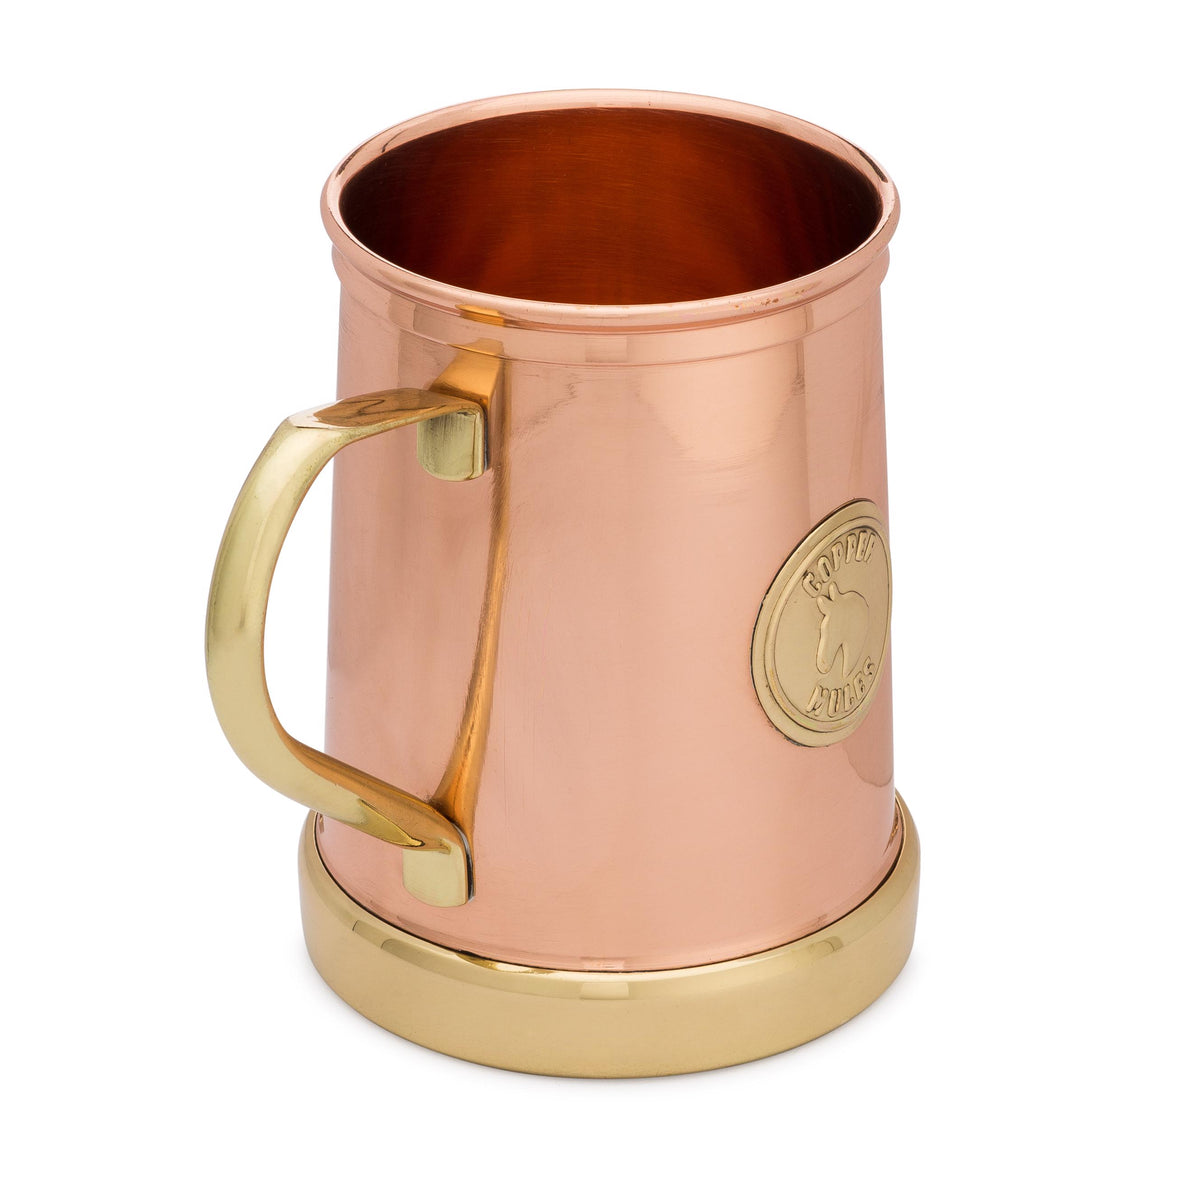 Original Hammered: 16oz Copper Moscow Mule Mug with Brass Handle by Copper  Mug Co.